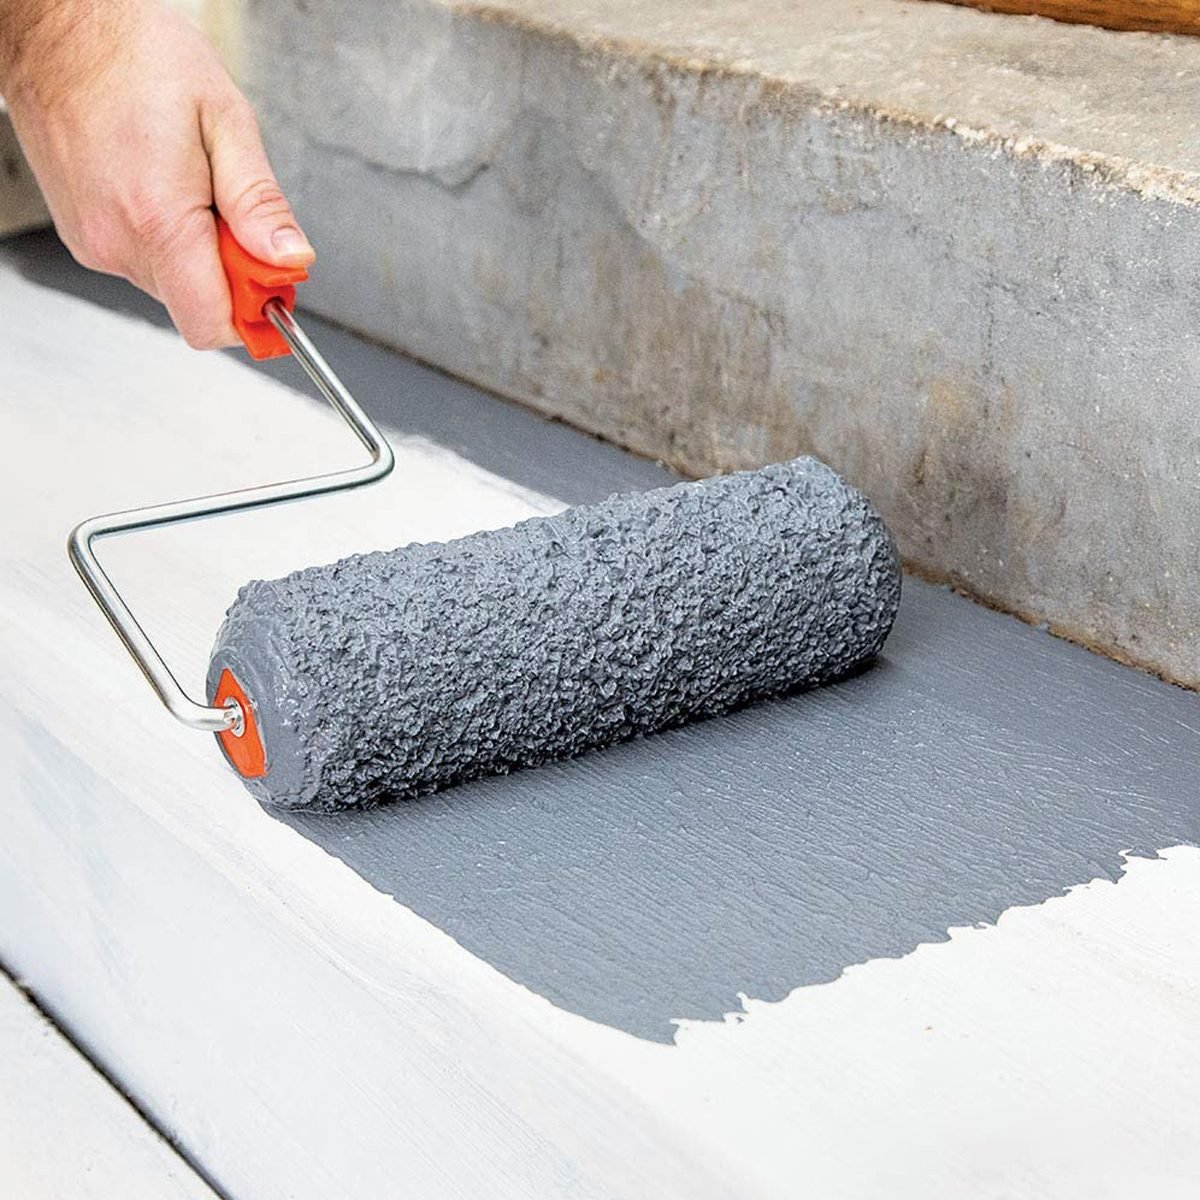 Best Waterproof Paint for Concrete in Various Colors